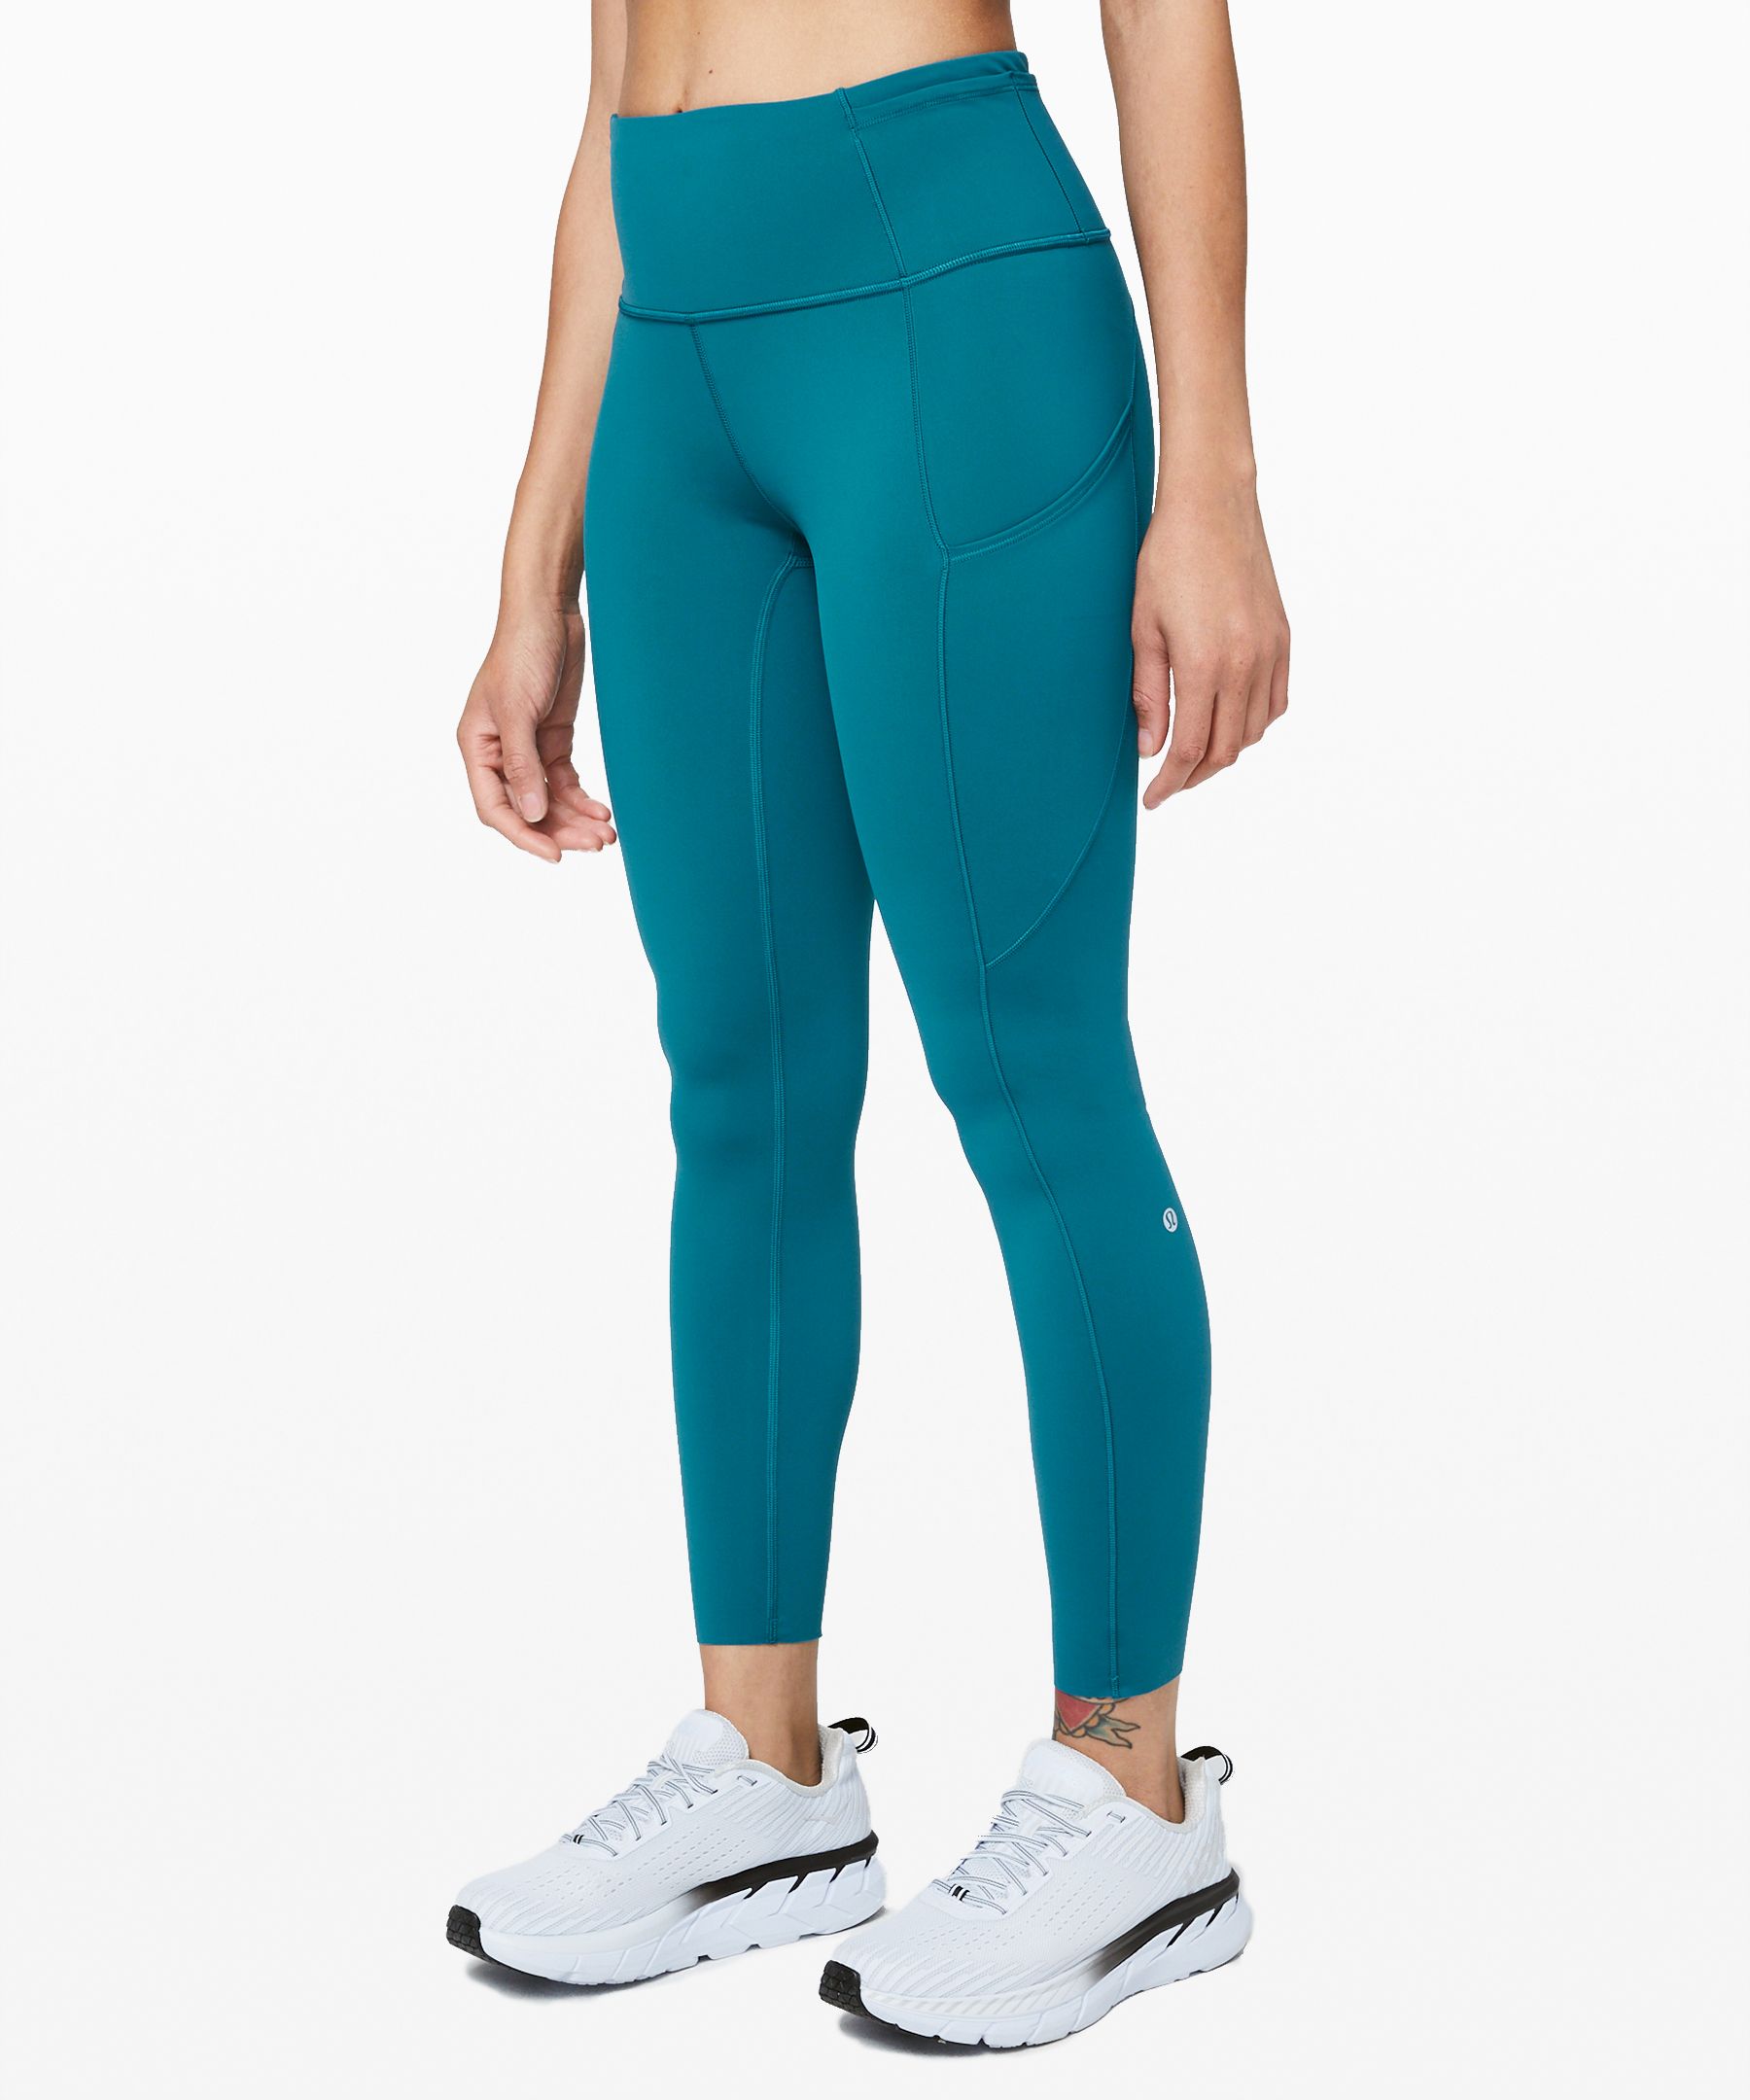 lululemon fast and free non reflective